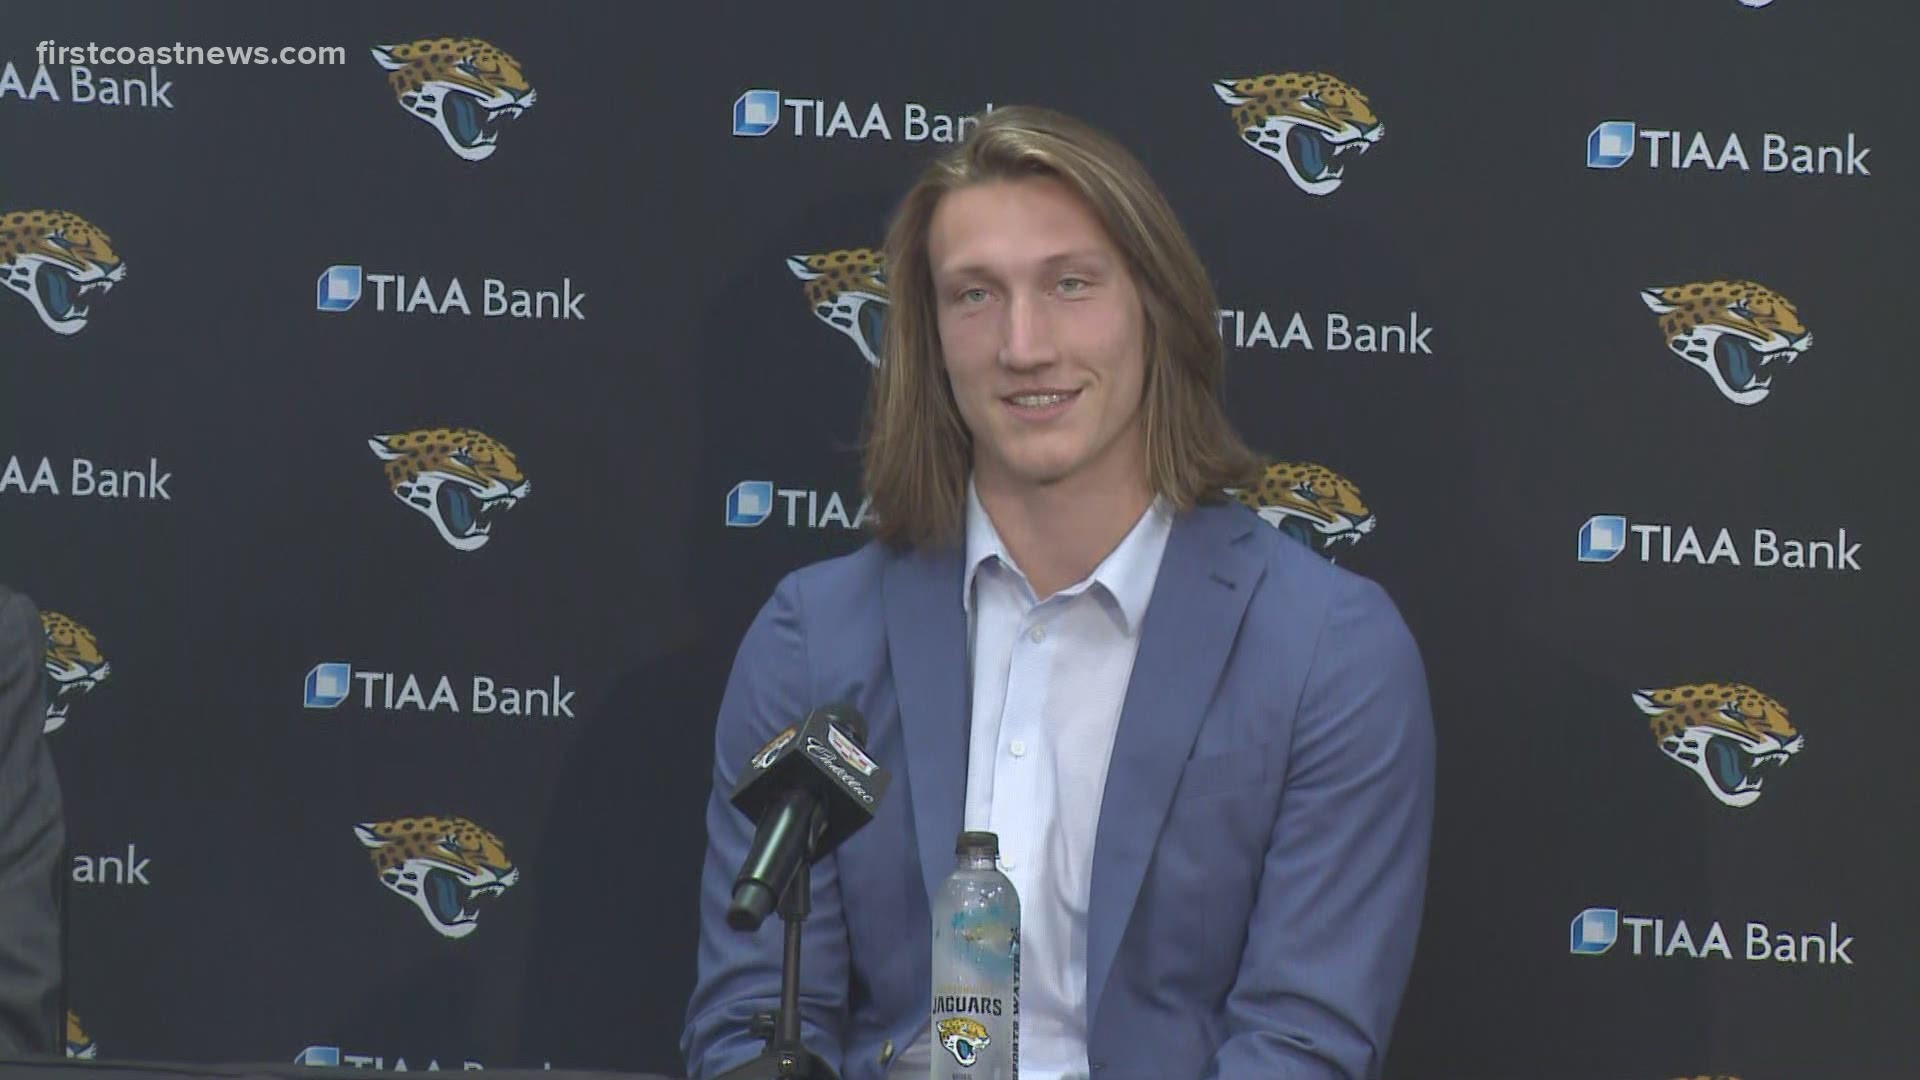 Trevor Lawrence was asked about his favorite plays at Clemson with teammate Travis Etienne. The two were both drafted by the Jacksonville Jaguars.